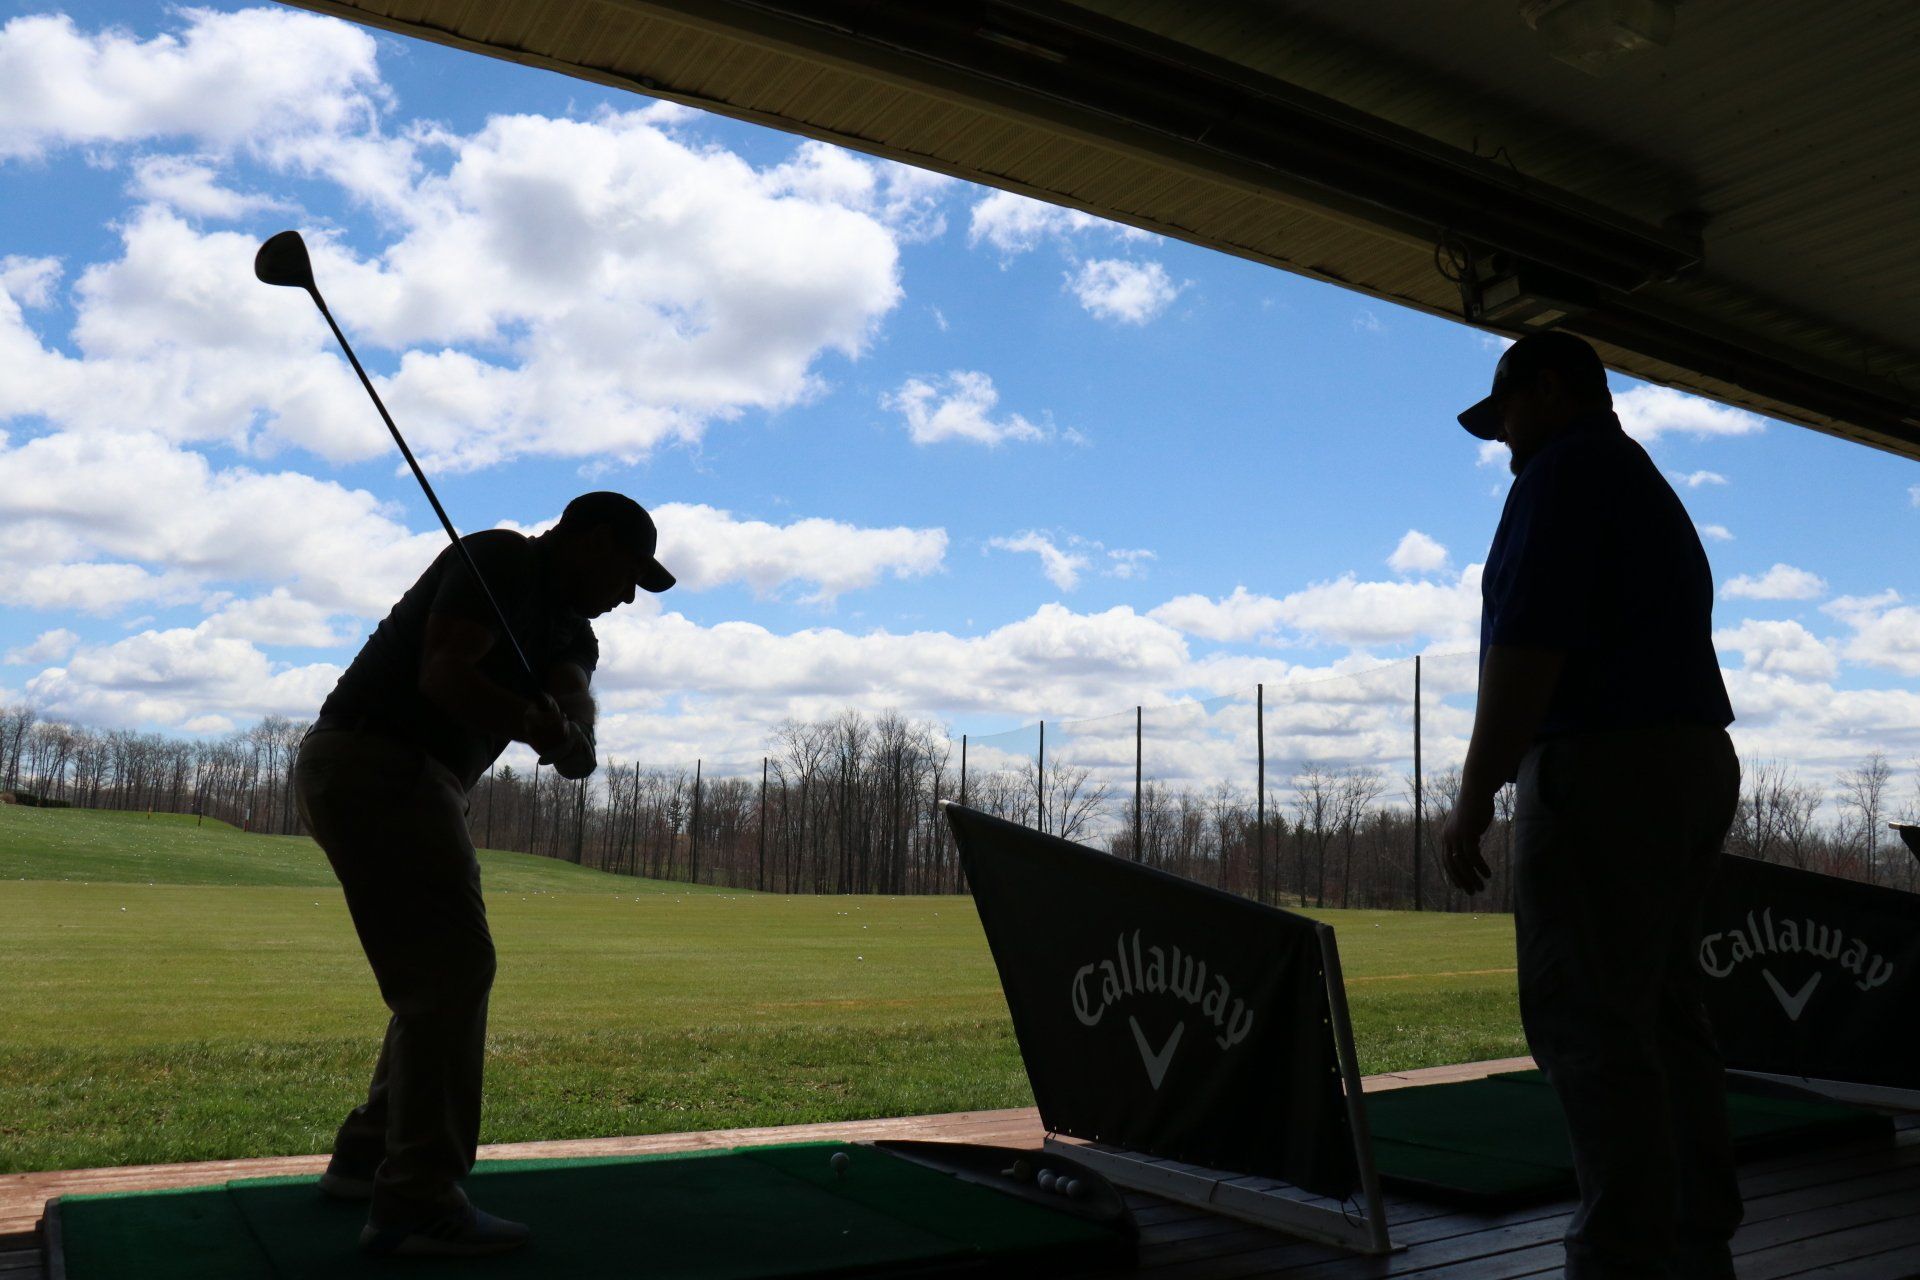 Silhouette of a man golfing on a driving range at a club fitting